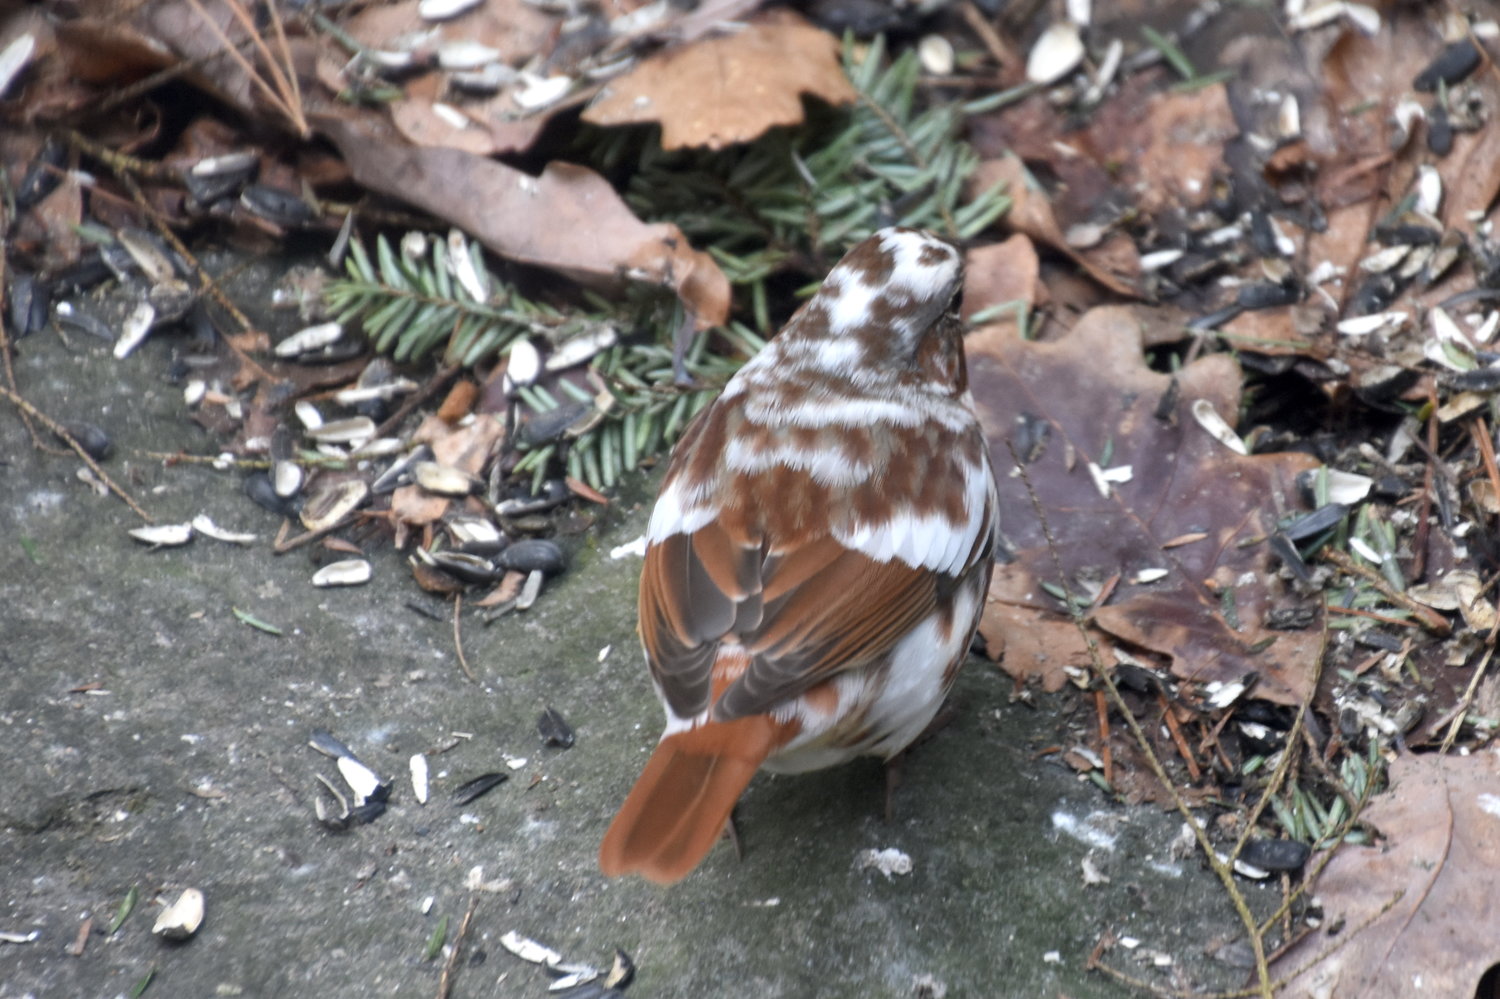 Views of the piebald leucistic fox sparrow from behind and from the left side.